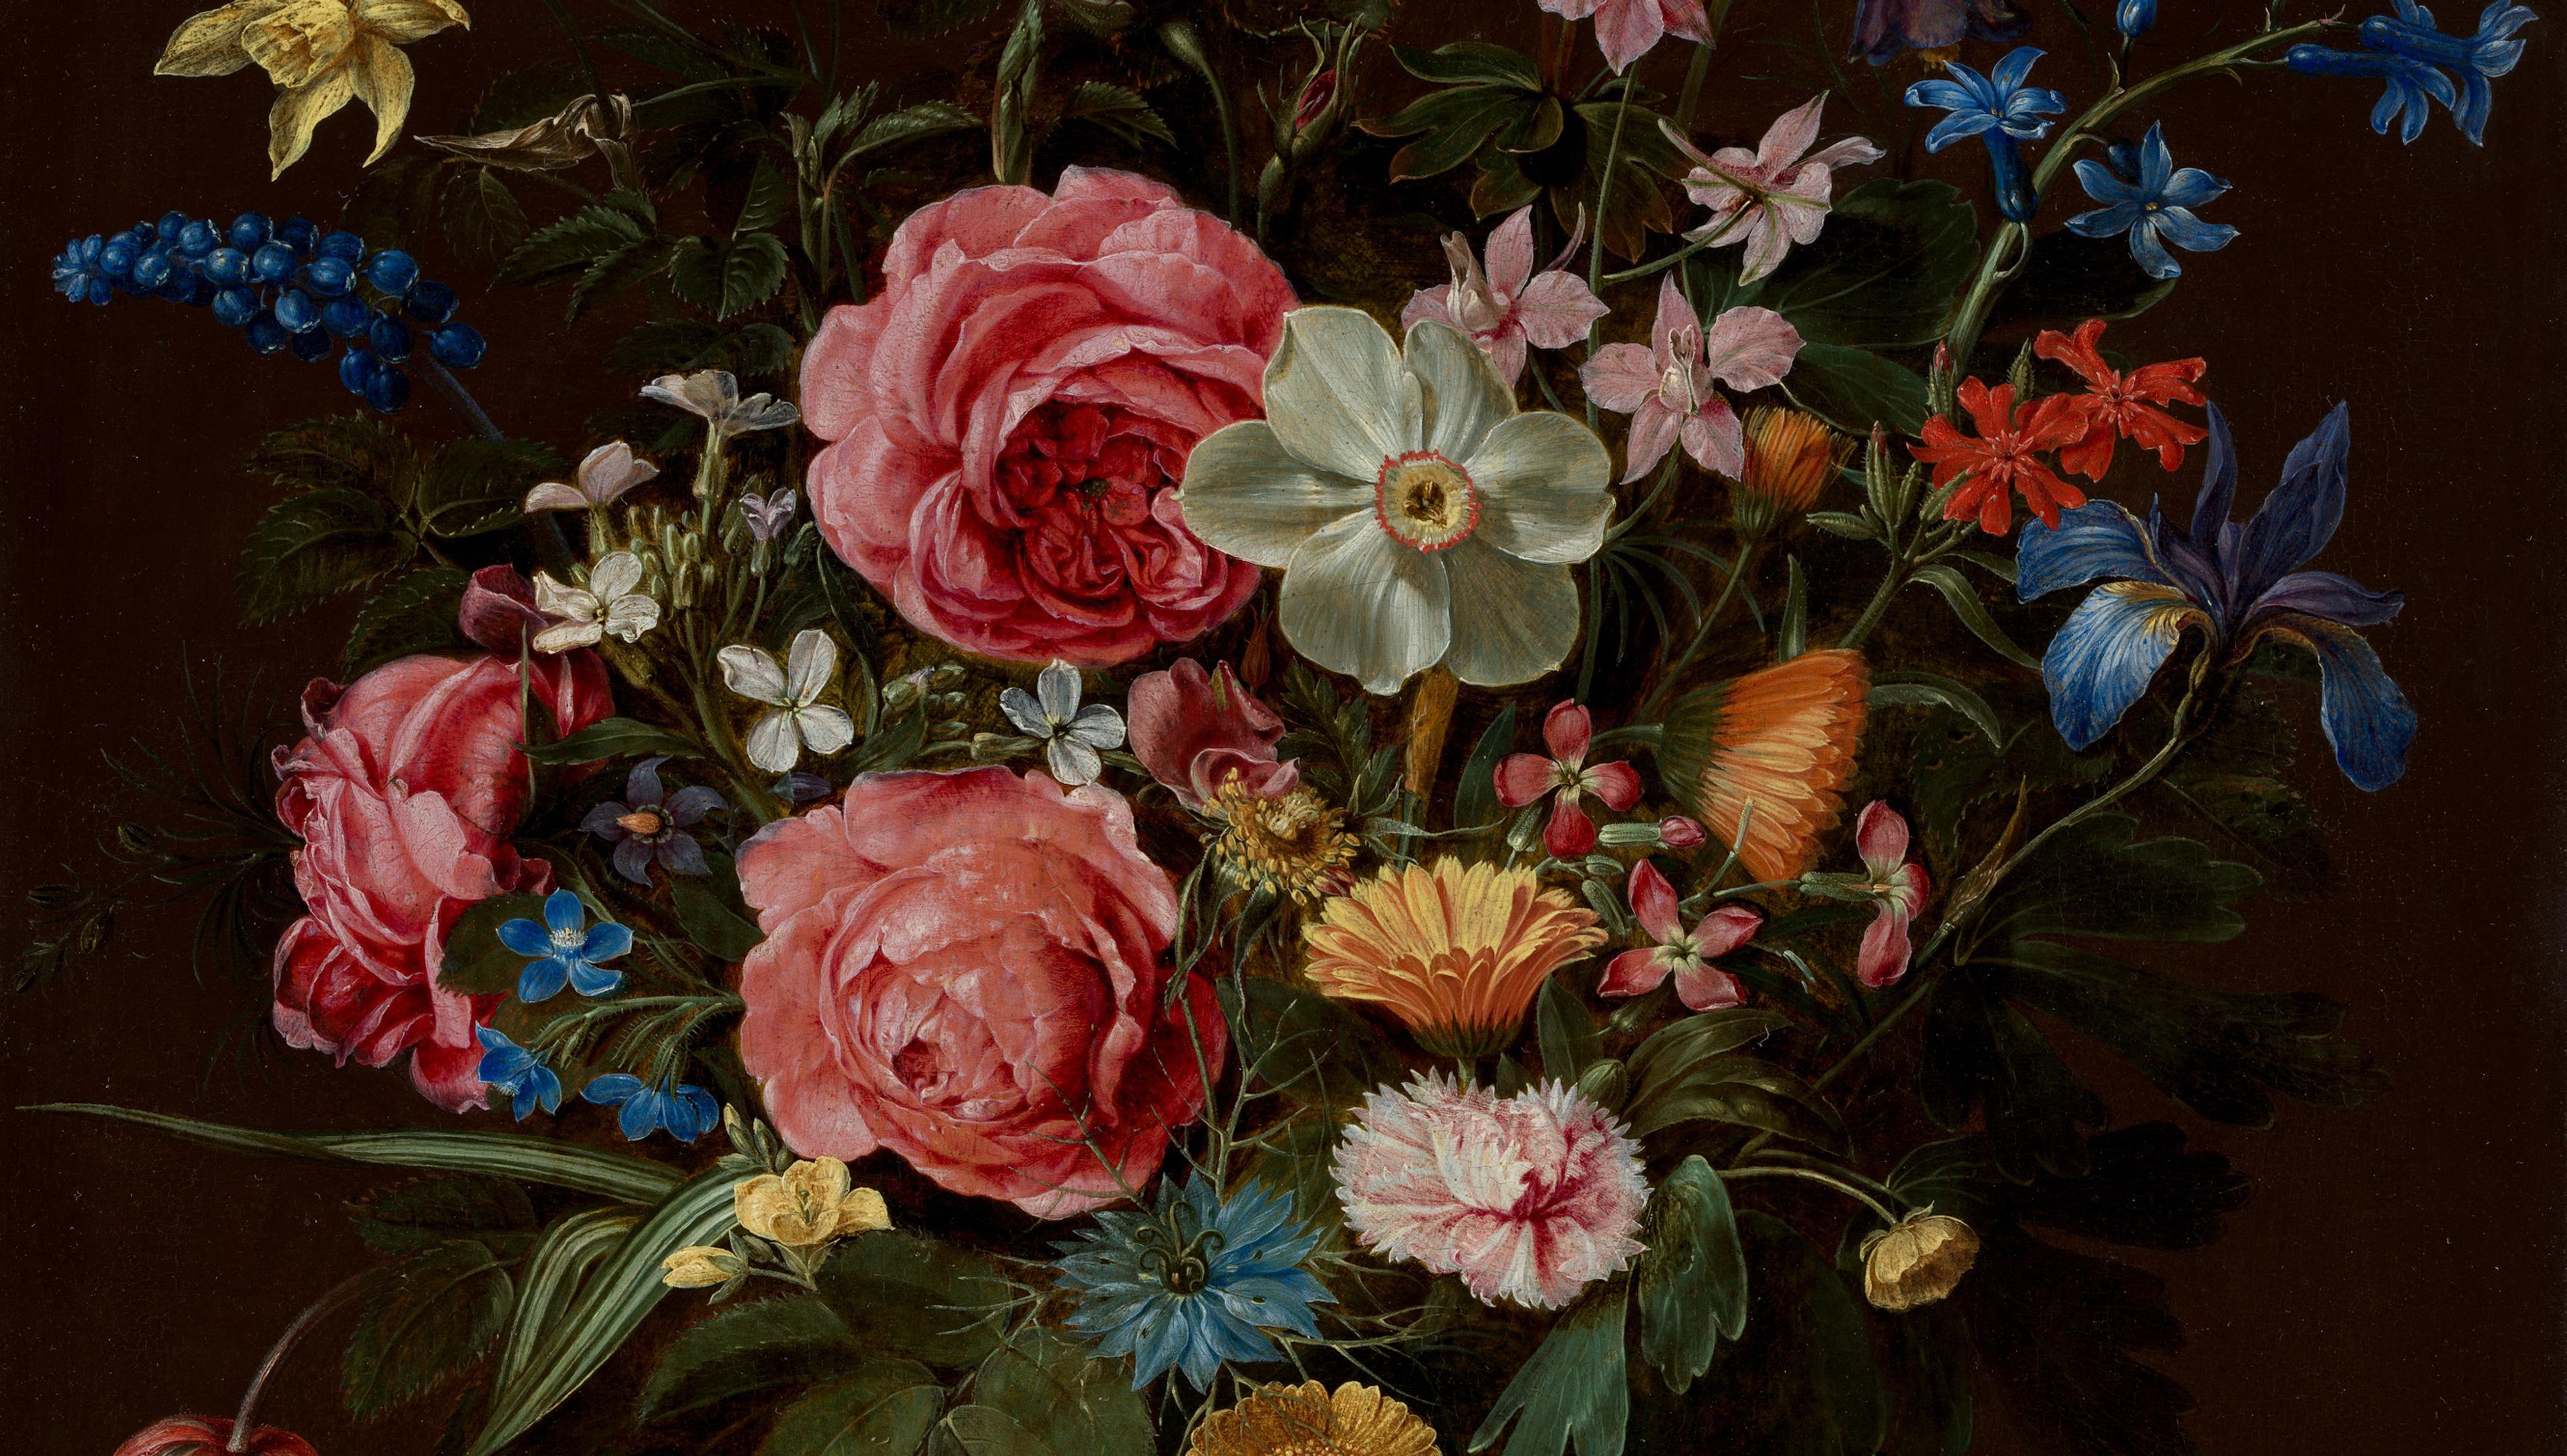 An oil painting of a bright bouquet of multi-colored blooming flowers against a dark background.